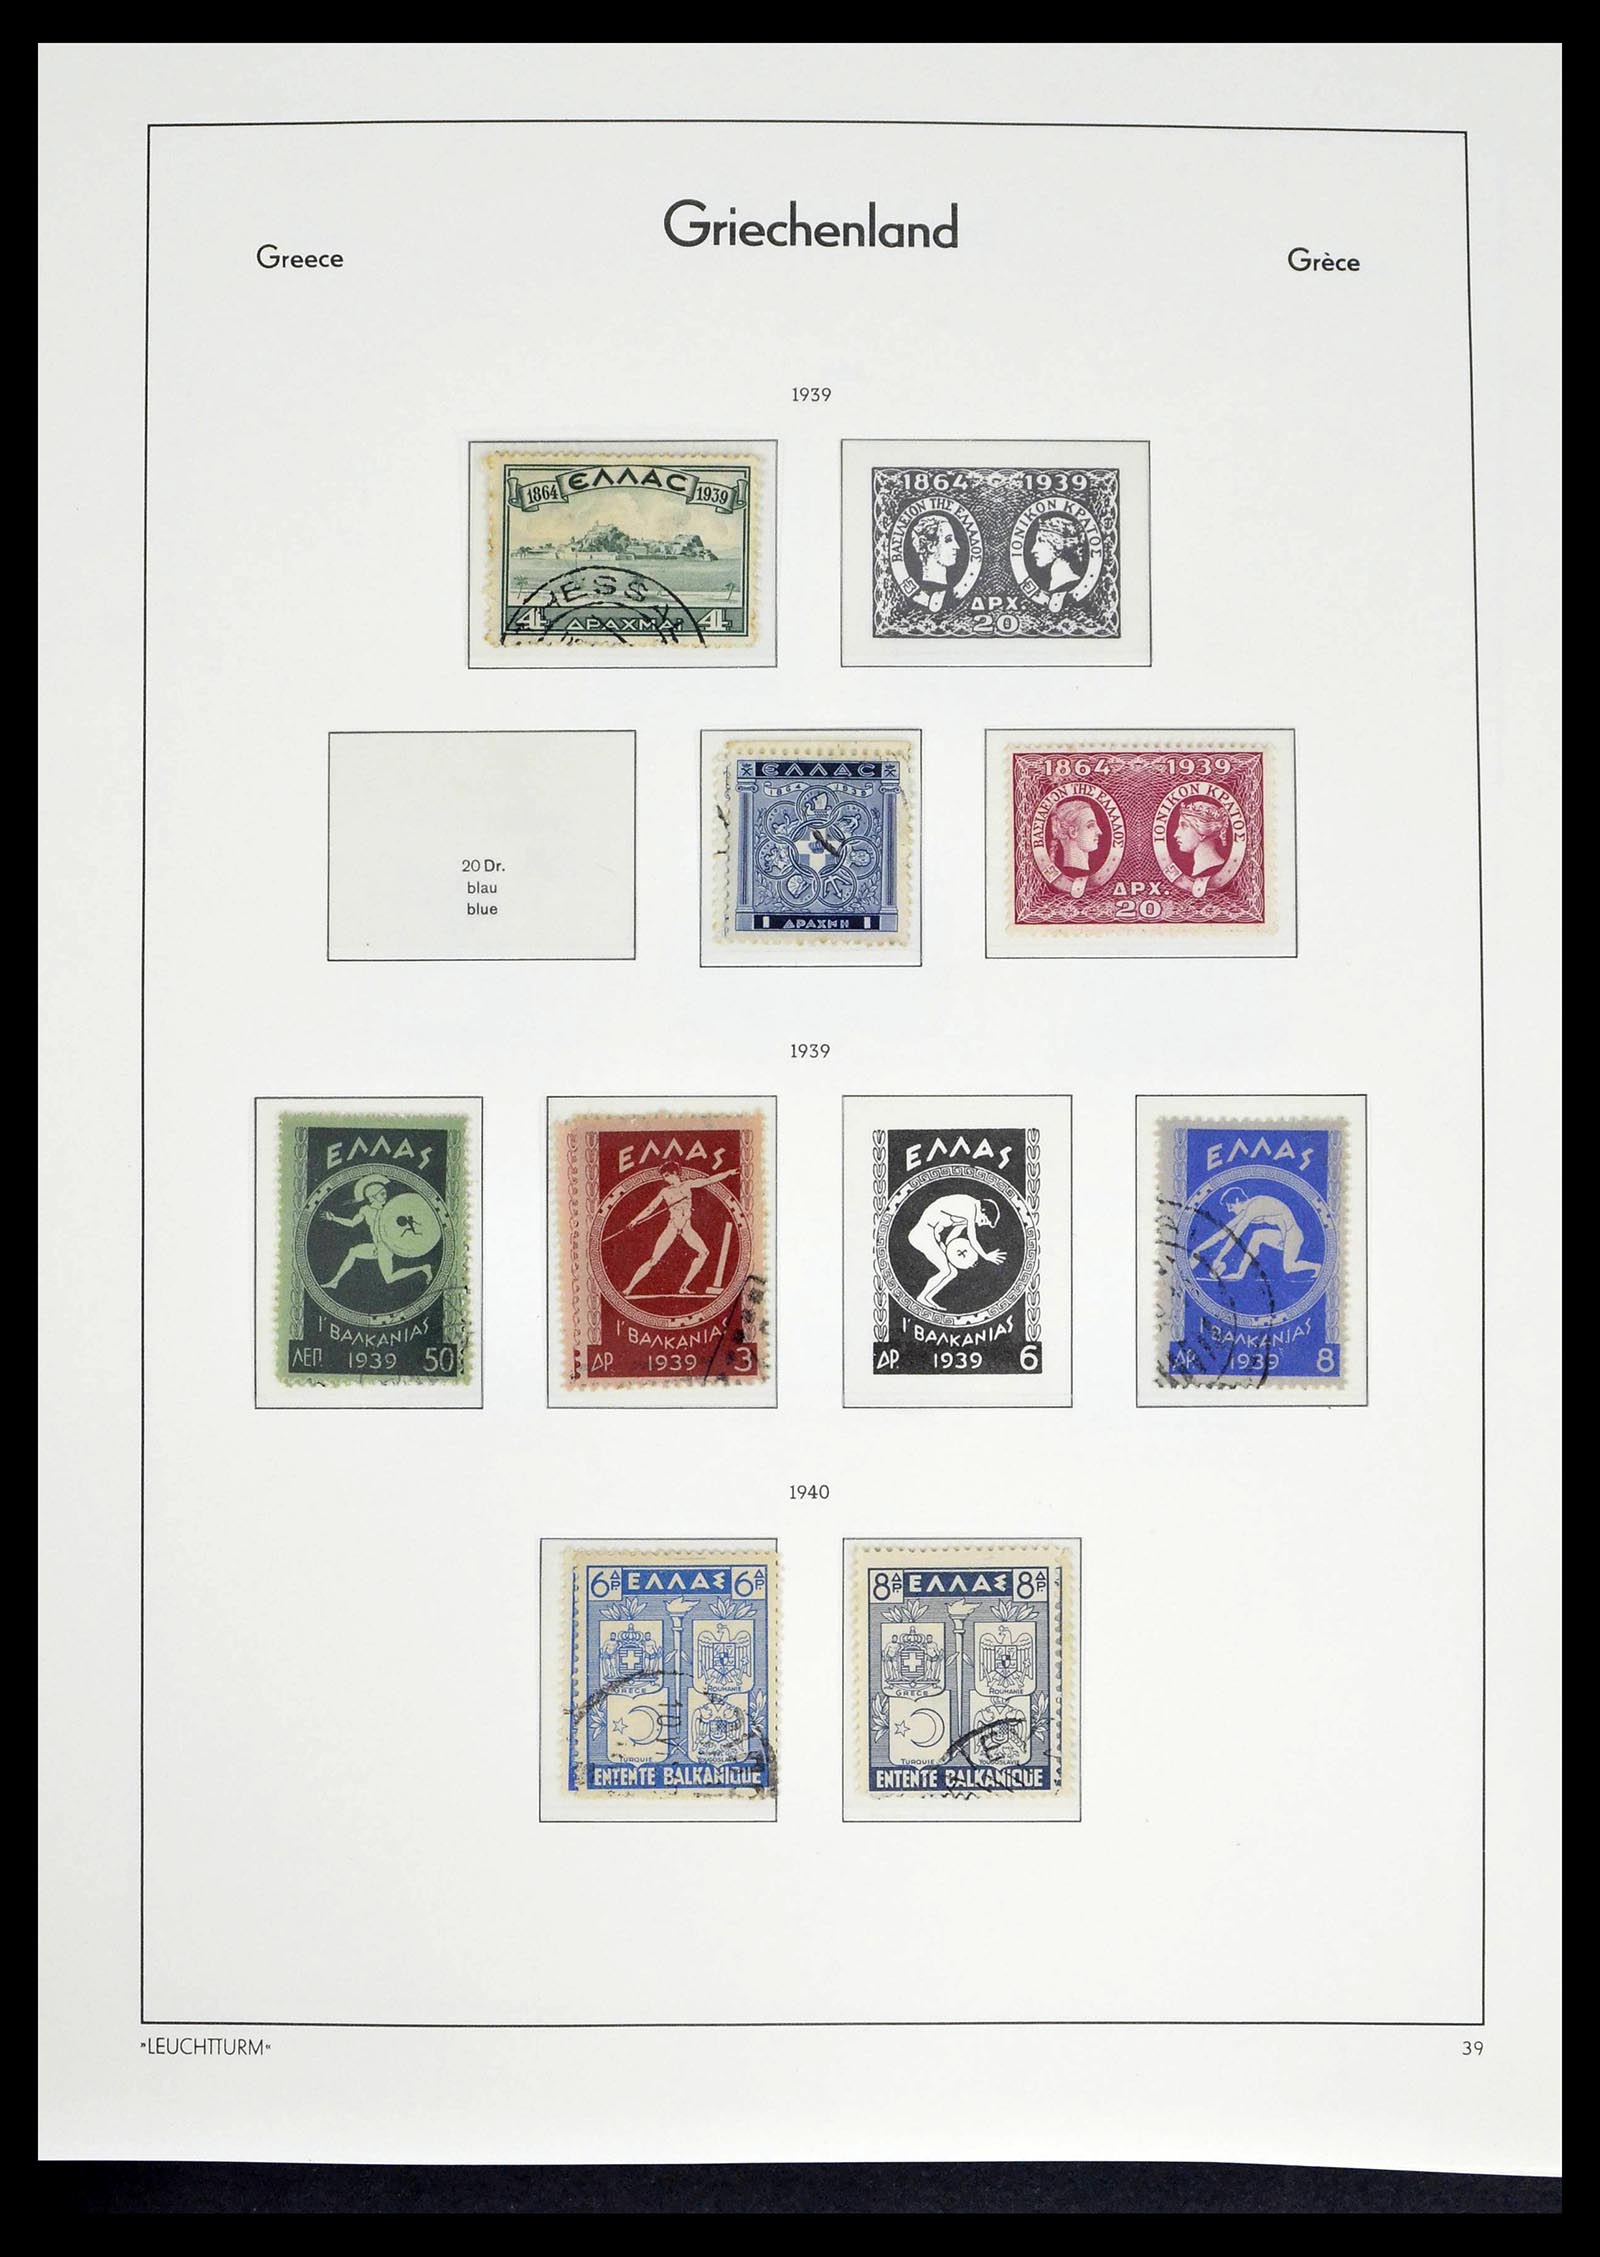 39243 0034 - Stamp collection 39243 Greece 1861-1965.